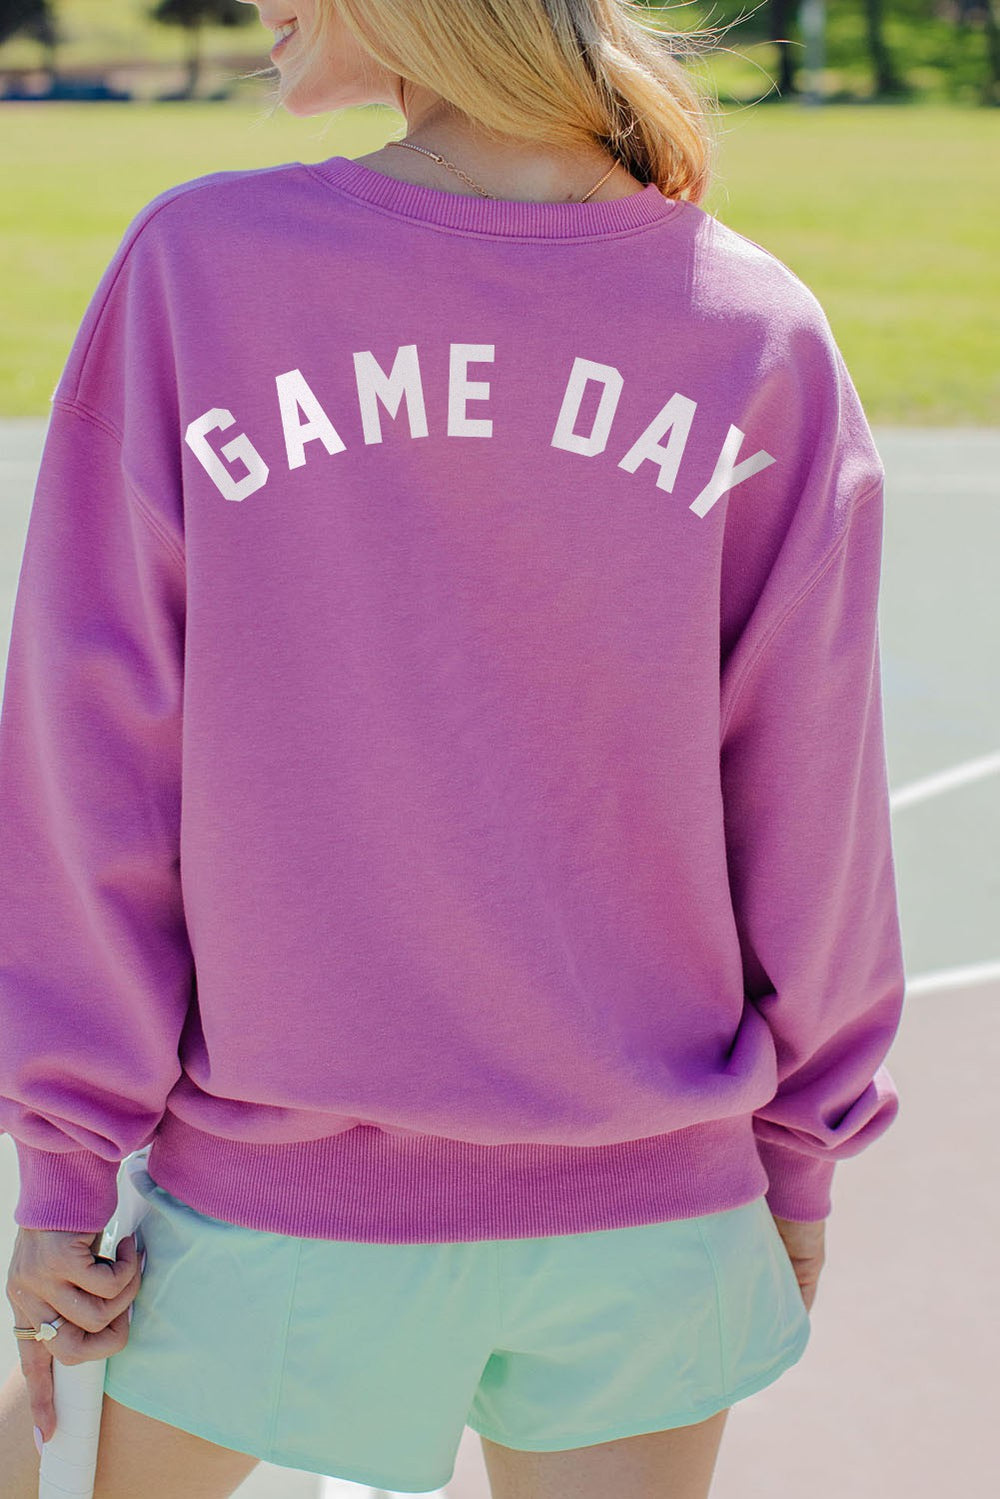 Touch Down Game Day Graphic Sweatshirt Pullover